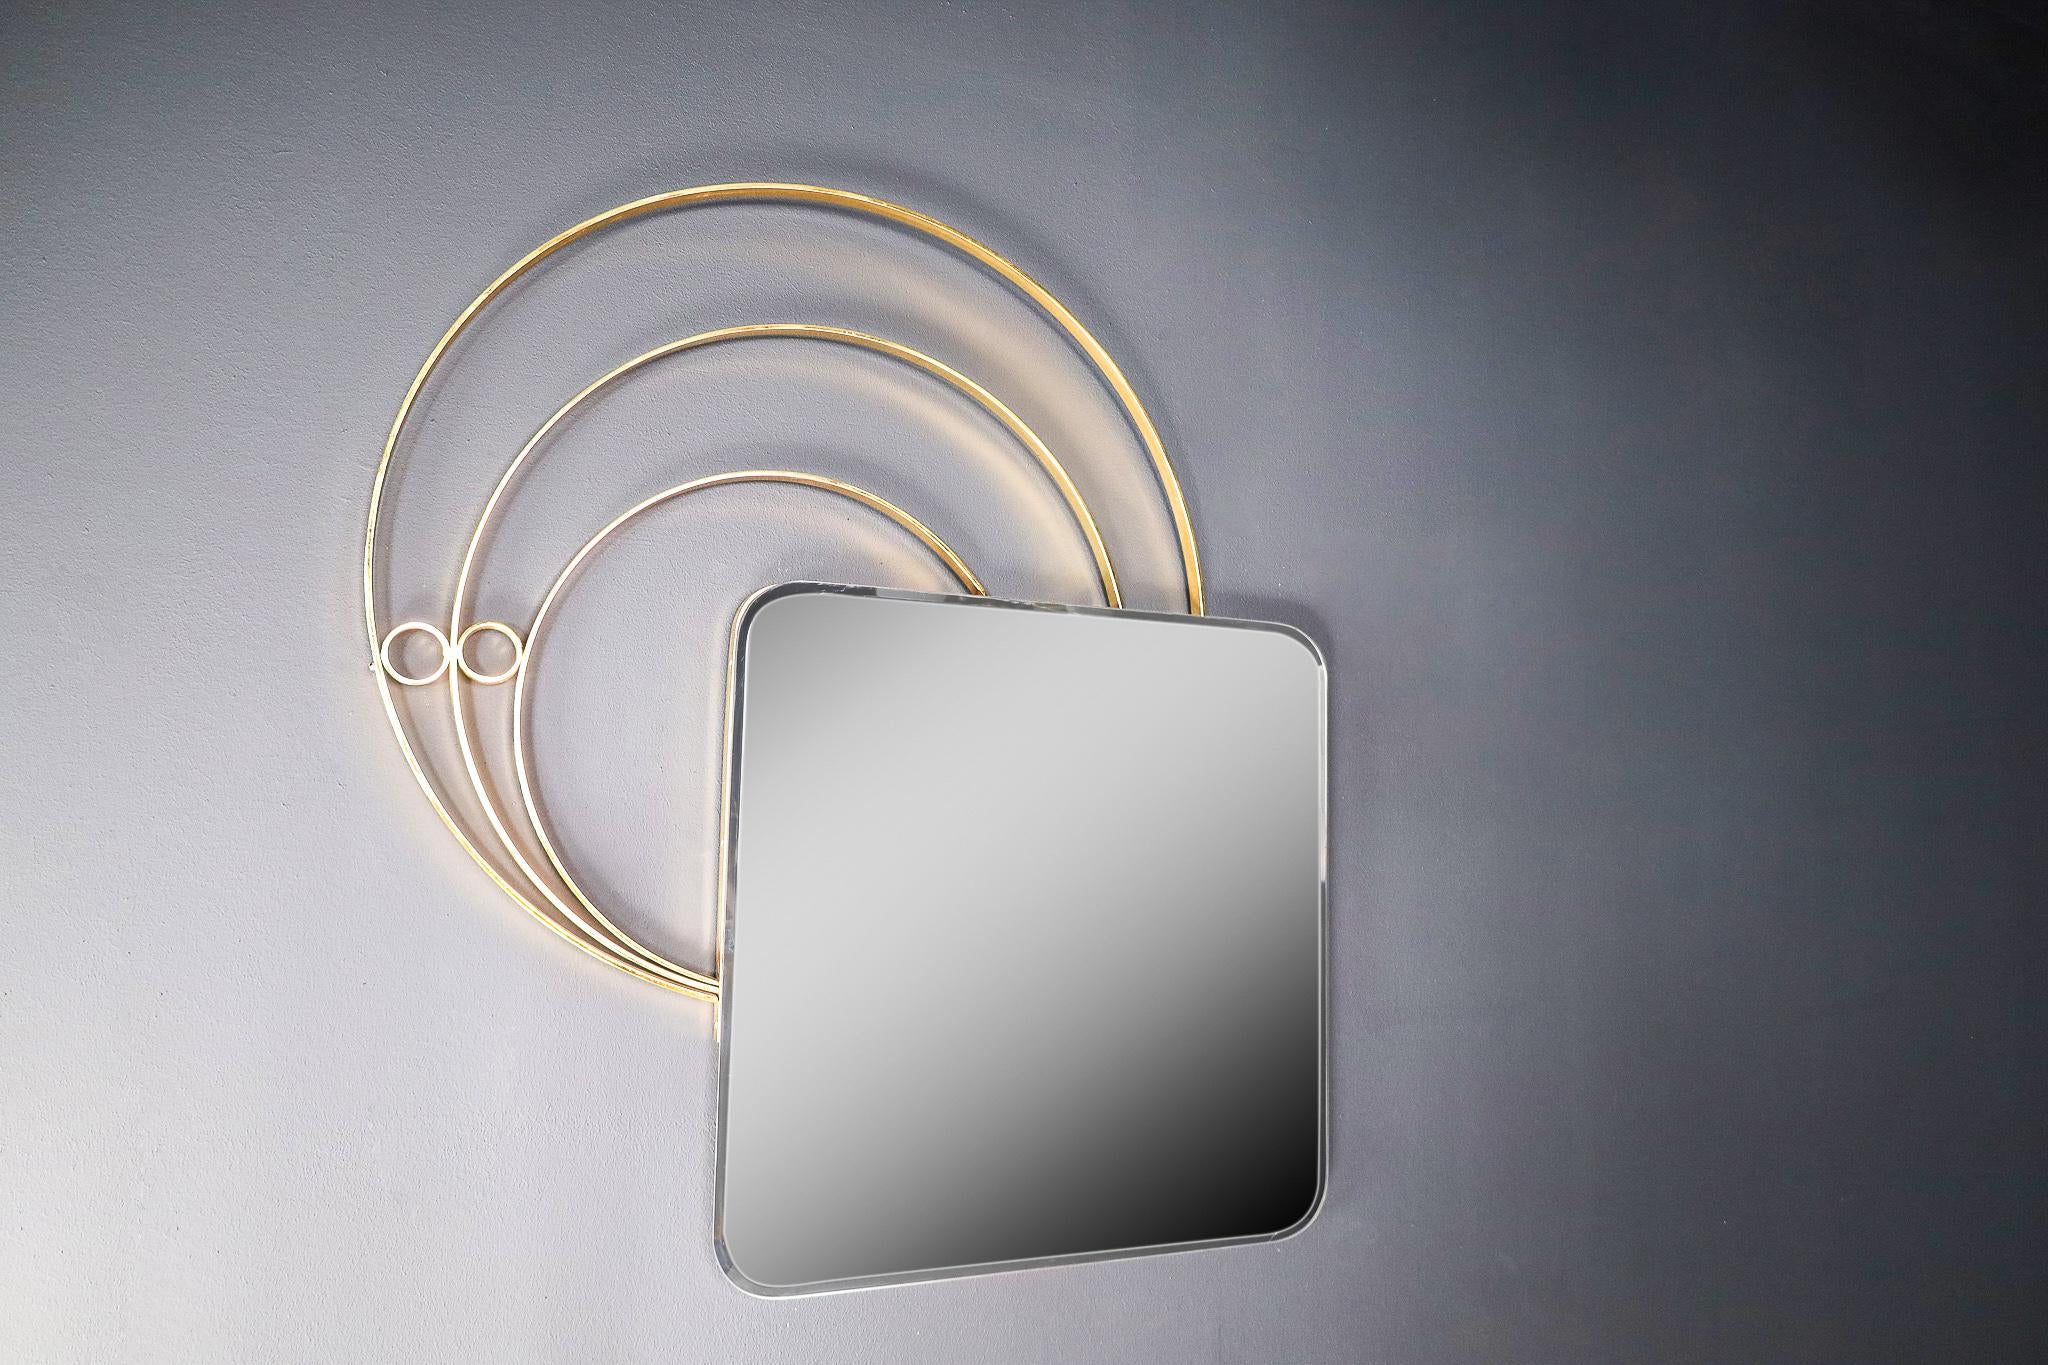 Large Italian Wall Mirror in Brass by Luciano Frigerio, Italy 1960s

Luciano Frigerio is an Italian designer well active in the 1960s-70s. He designed elegant furniture in a brutalist chic style. The quality of his creations is quite excellent.